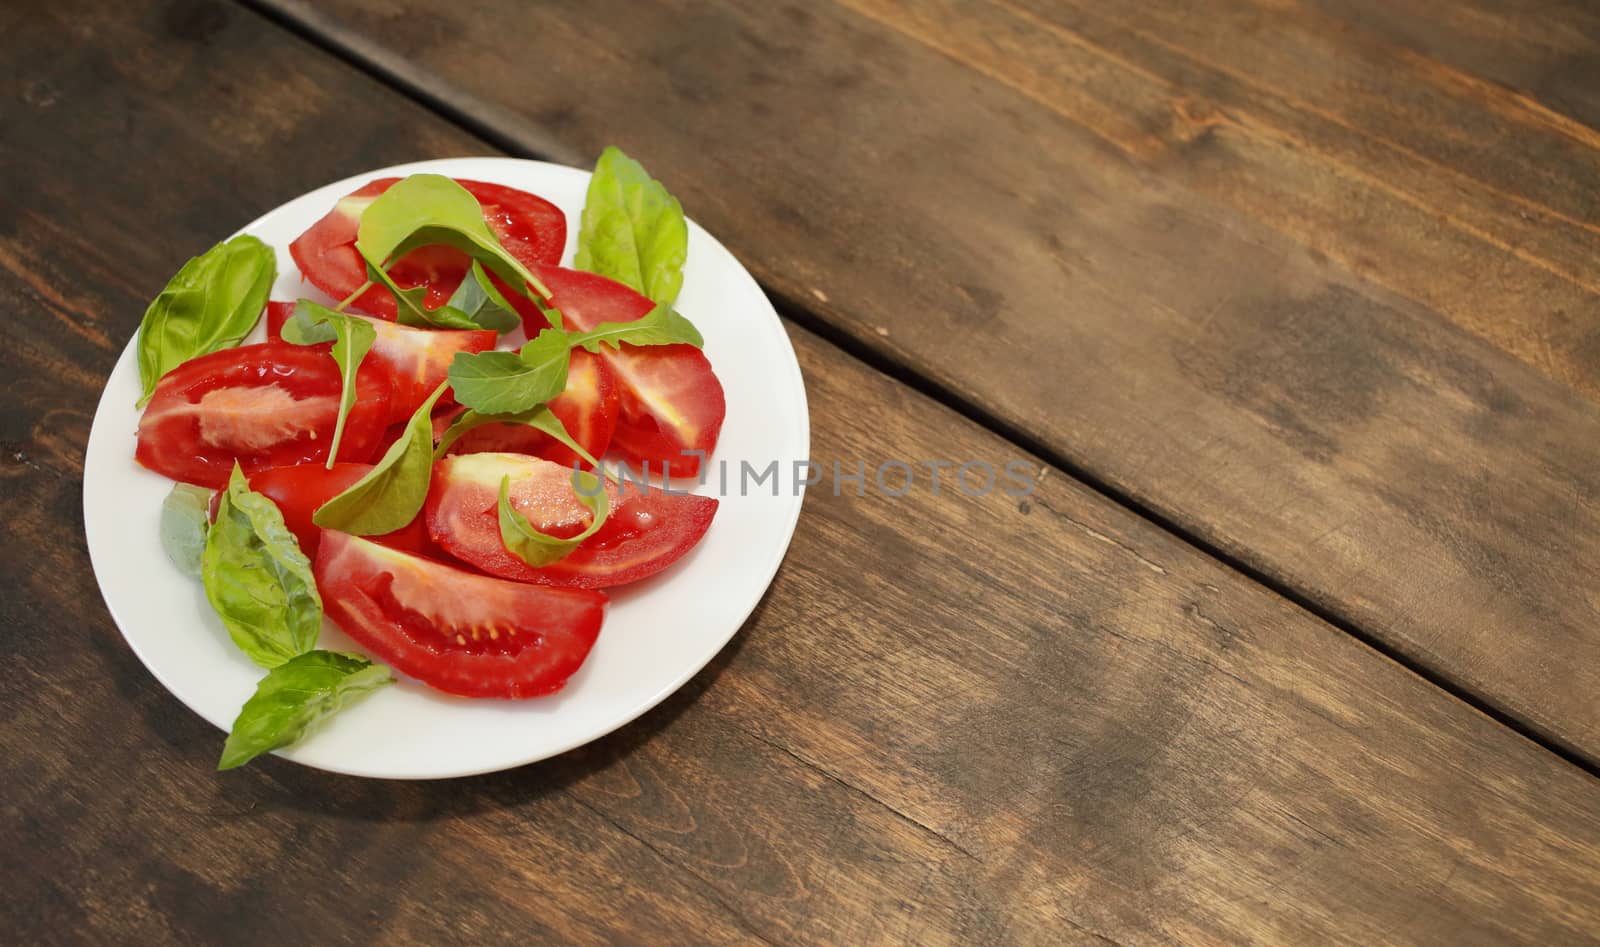 Sliced tomatoes with lettuce on a white plate. Healthy eating concept by selinsmo